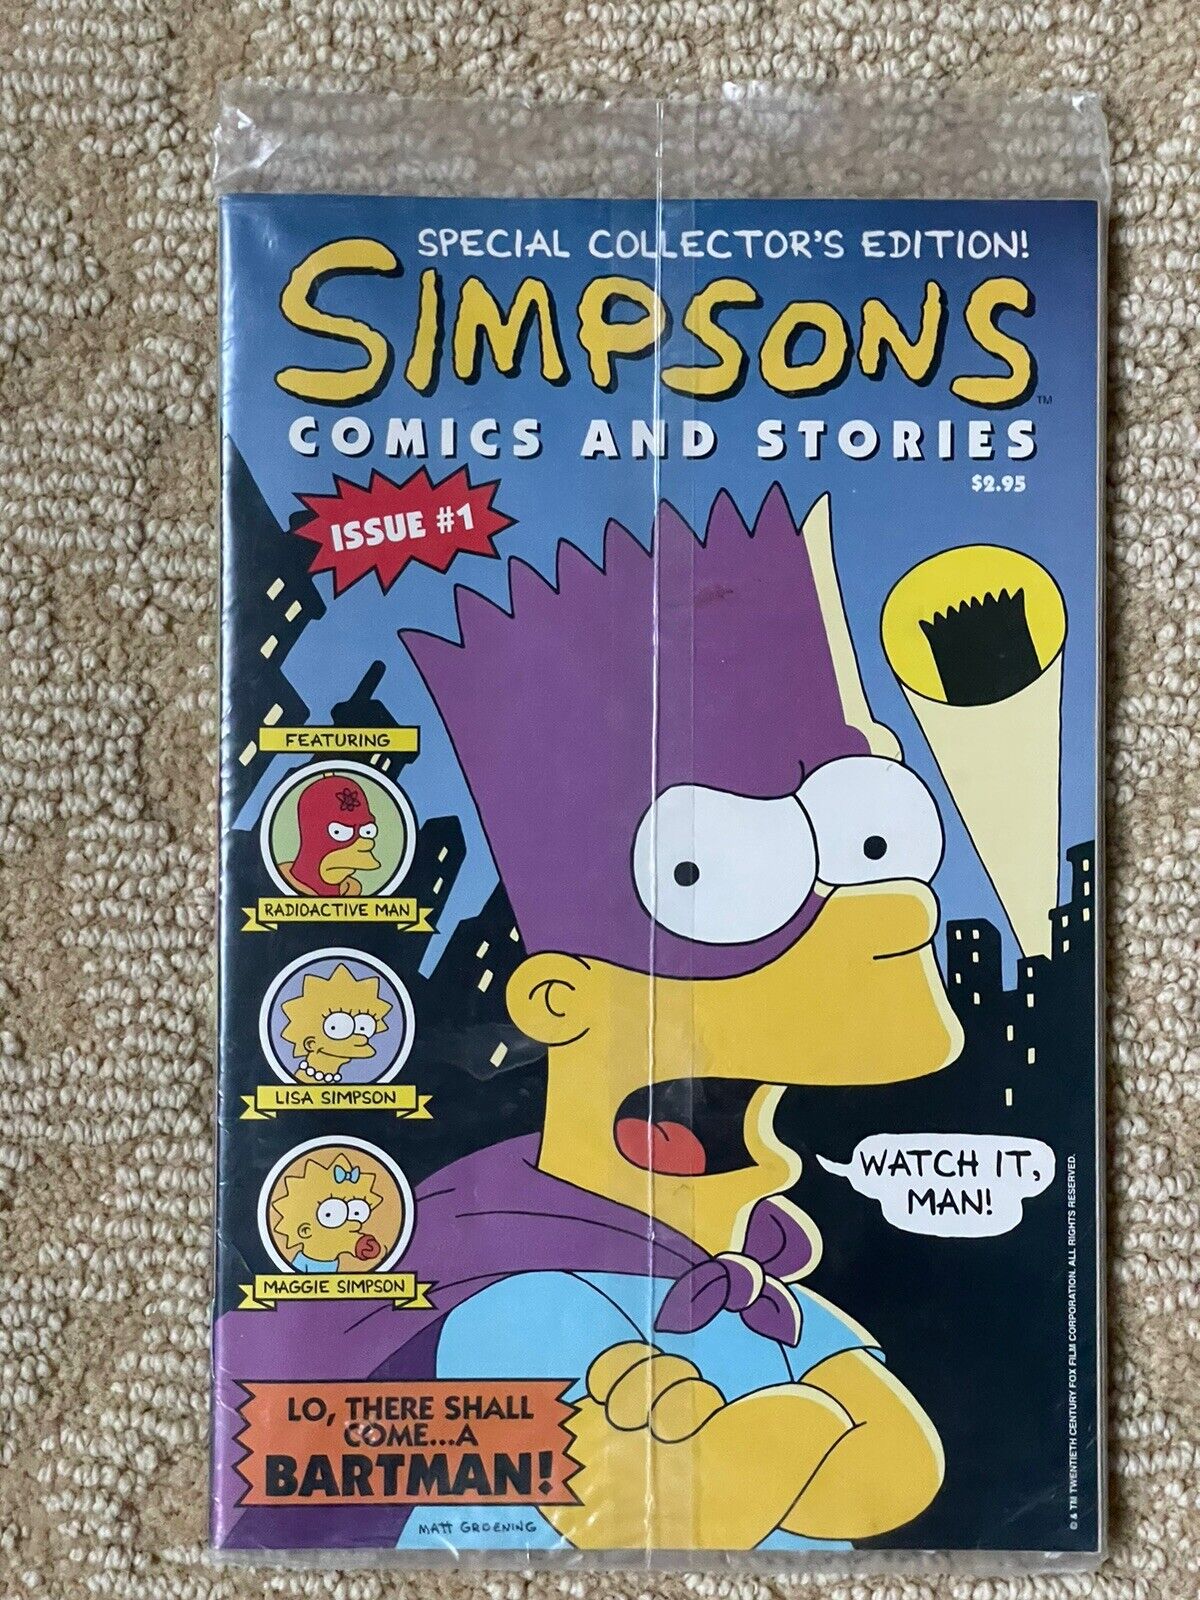 Simpsons Comic Book Issue #1 (w/ Poster) 1993 - NEW / SEALED